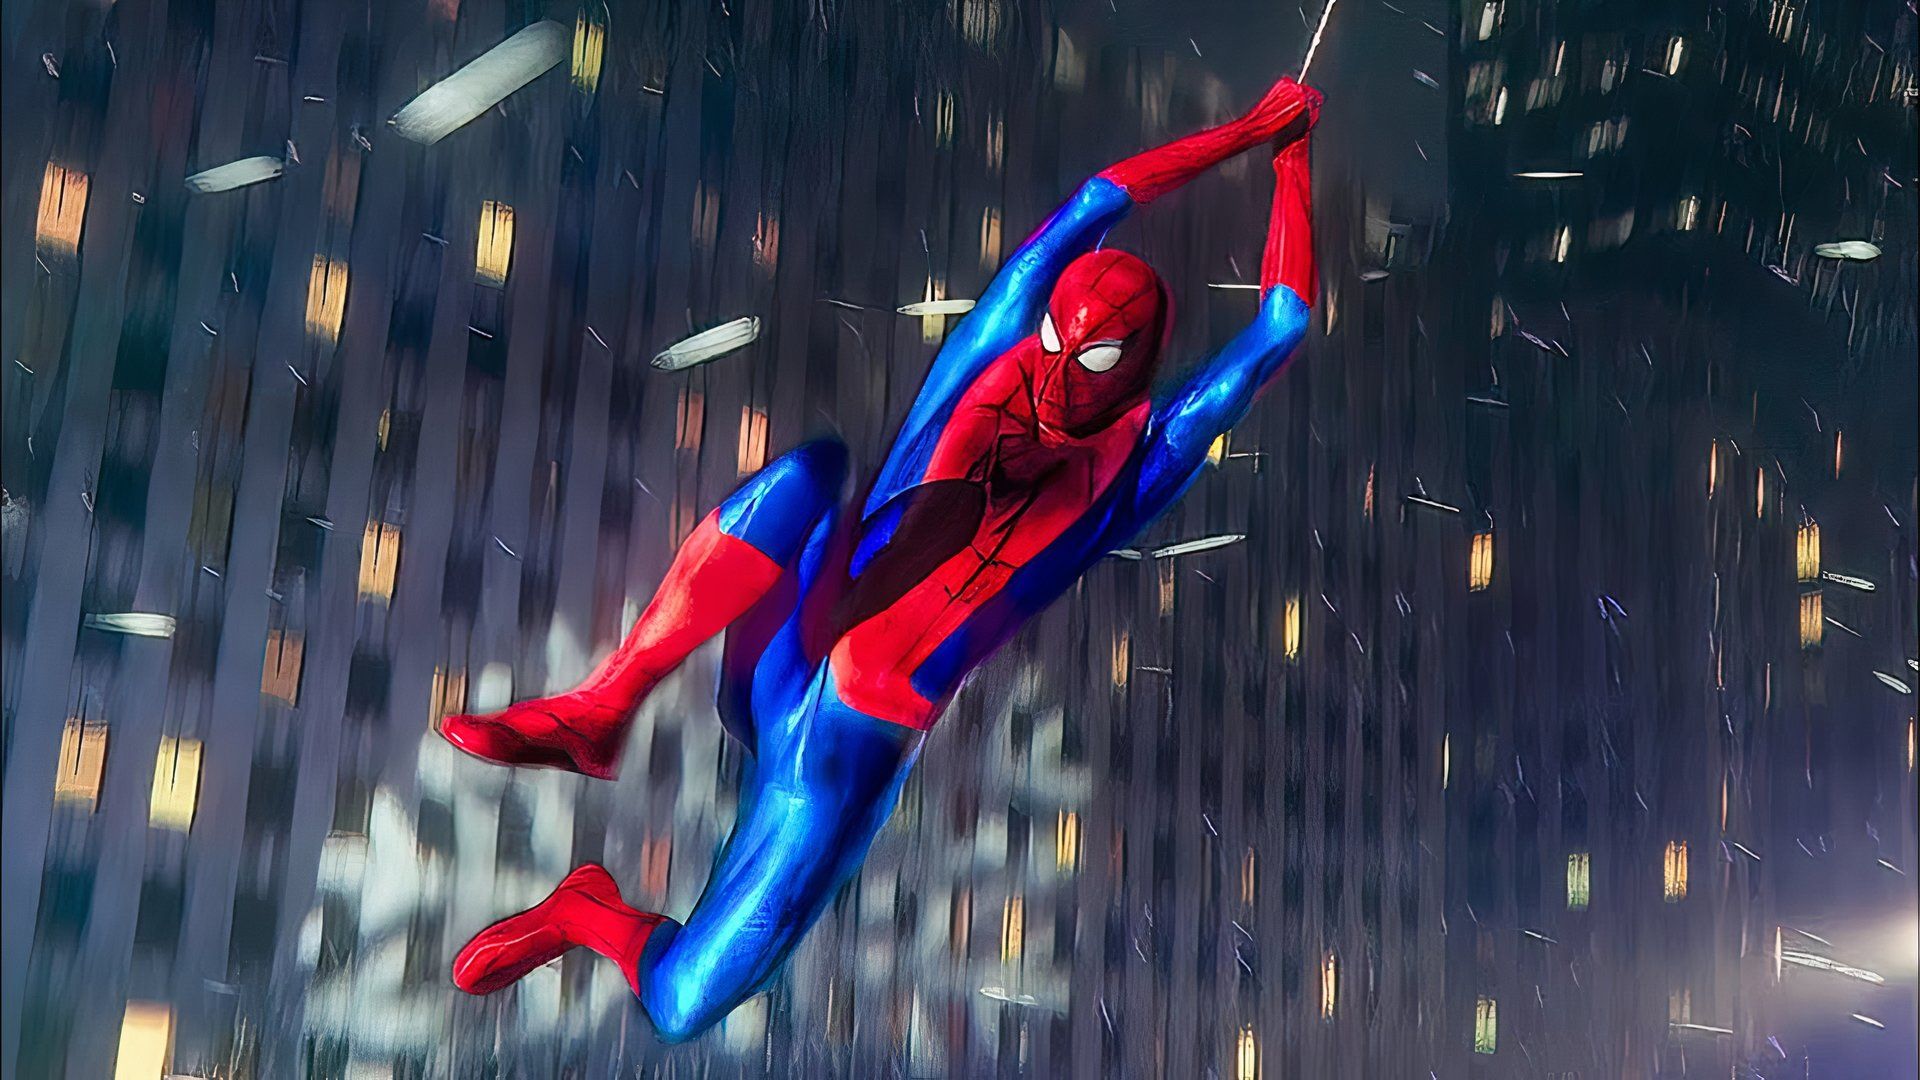 Spider-Man web swinging at the end of No Way Home.